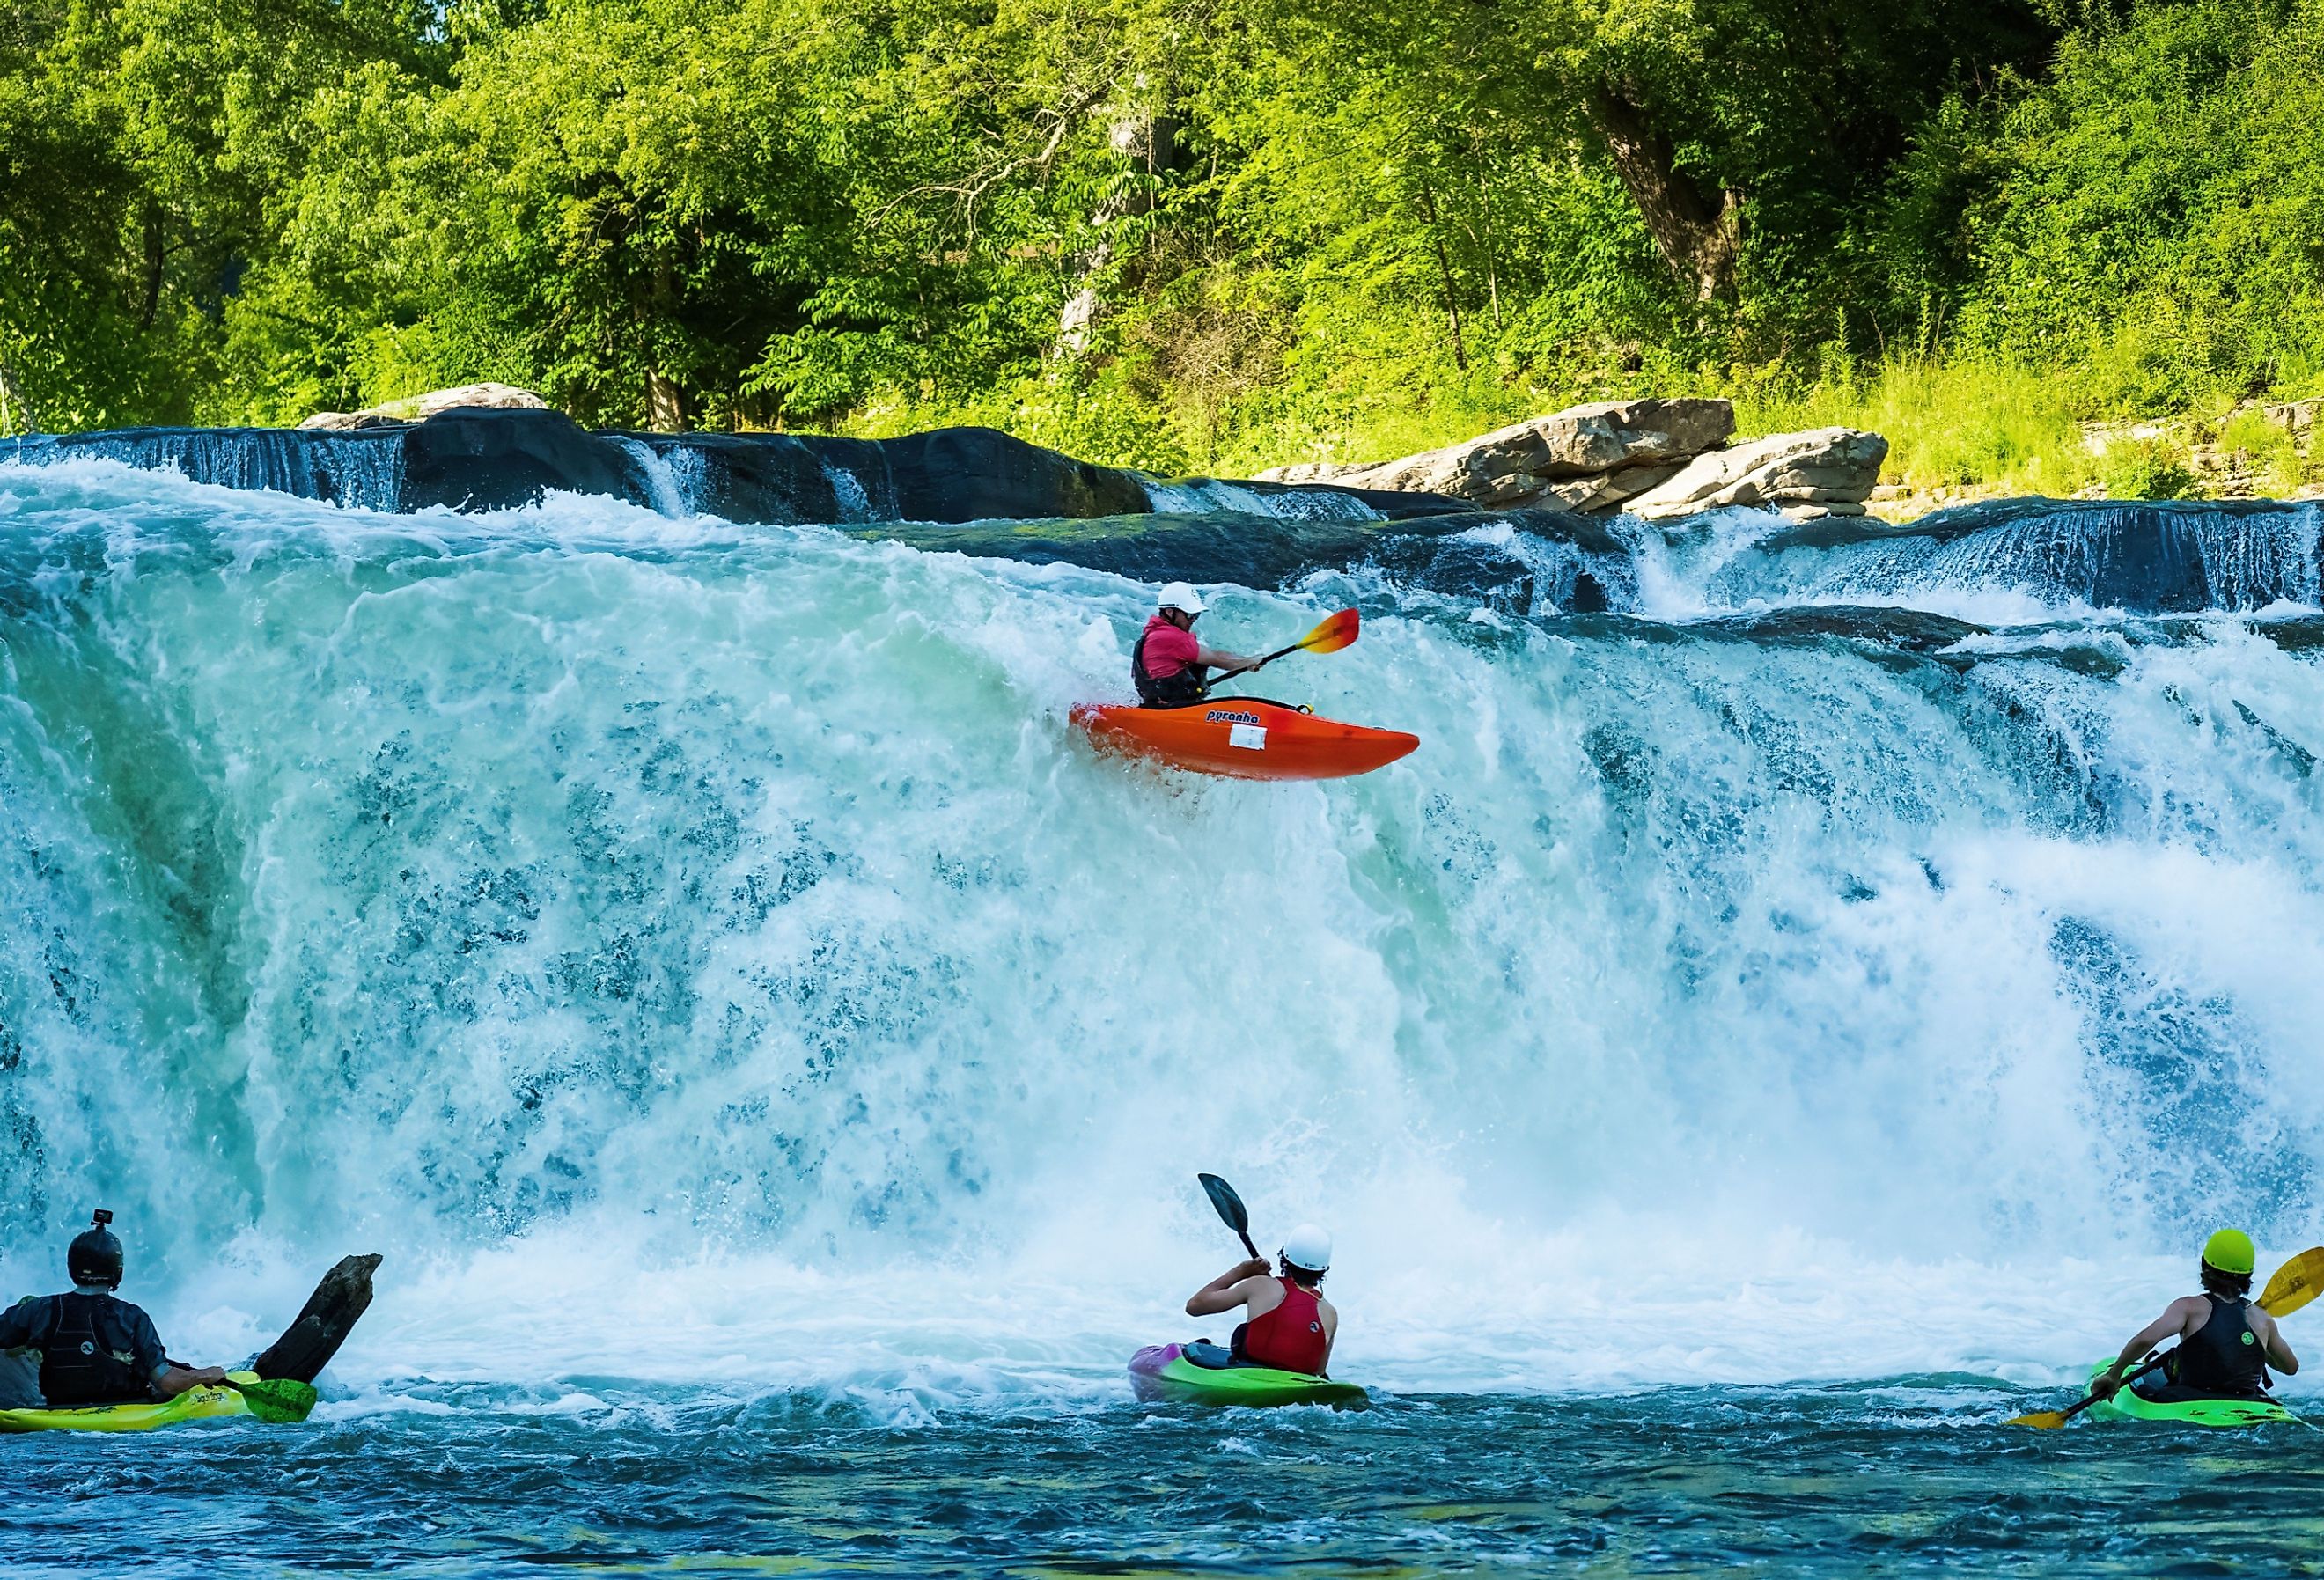 Group of kayakers going over Ohiopyle Falls in Ohiopyle, PA. Image credit Marked Imagery via Shutterstock.